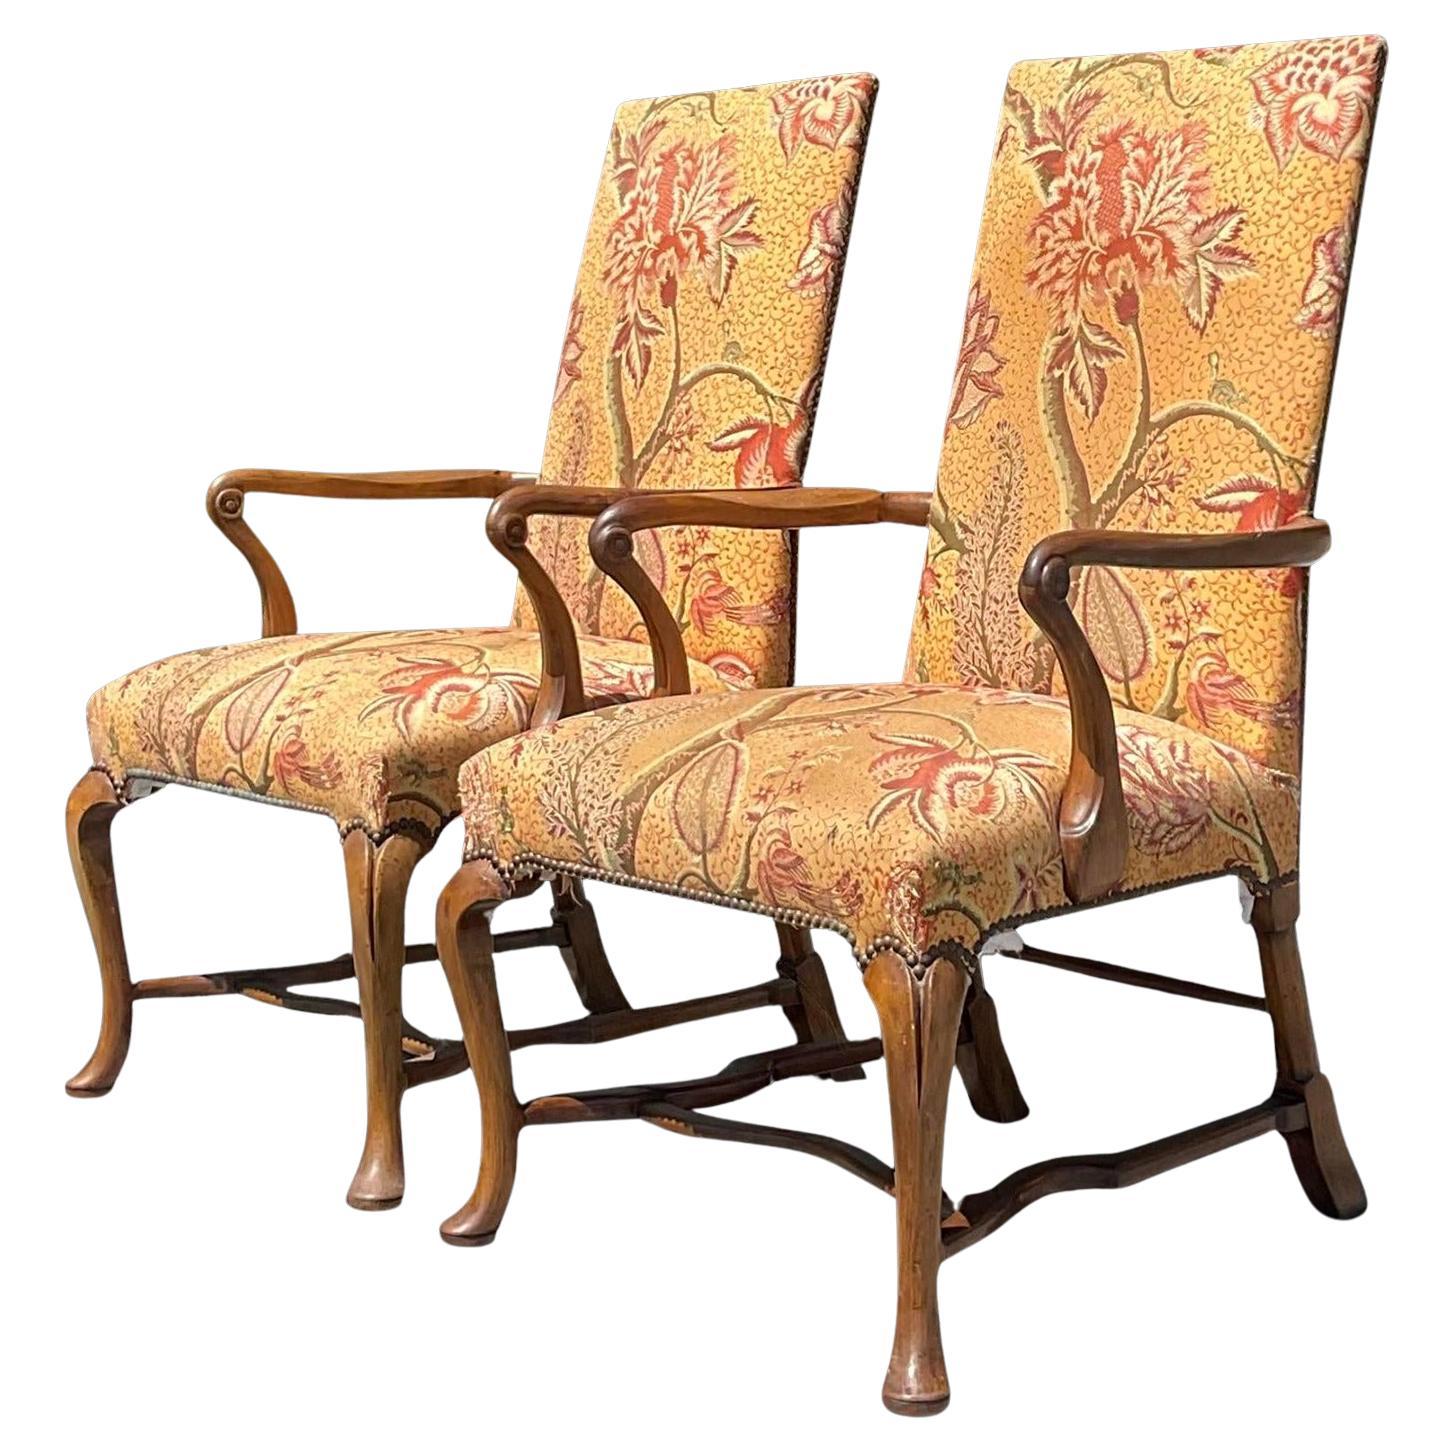 Vintage Regency Shepard’s Crook High Back Chairs - a Pair For Sale